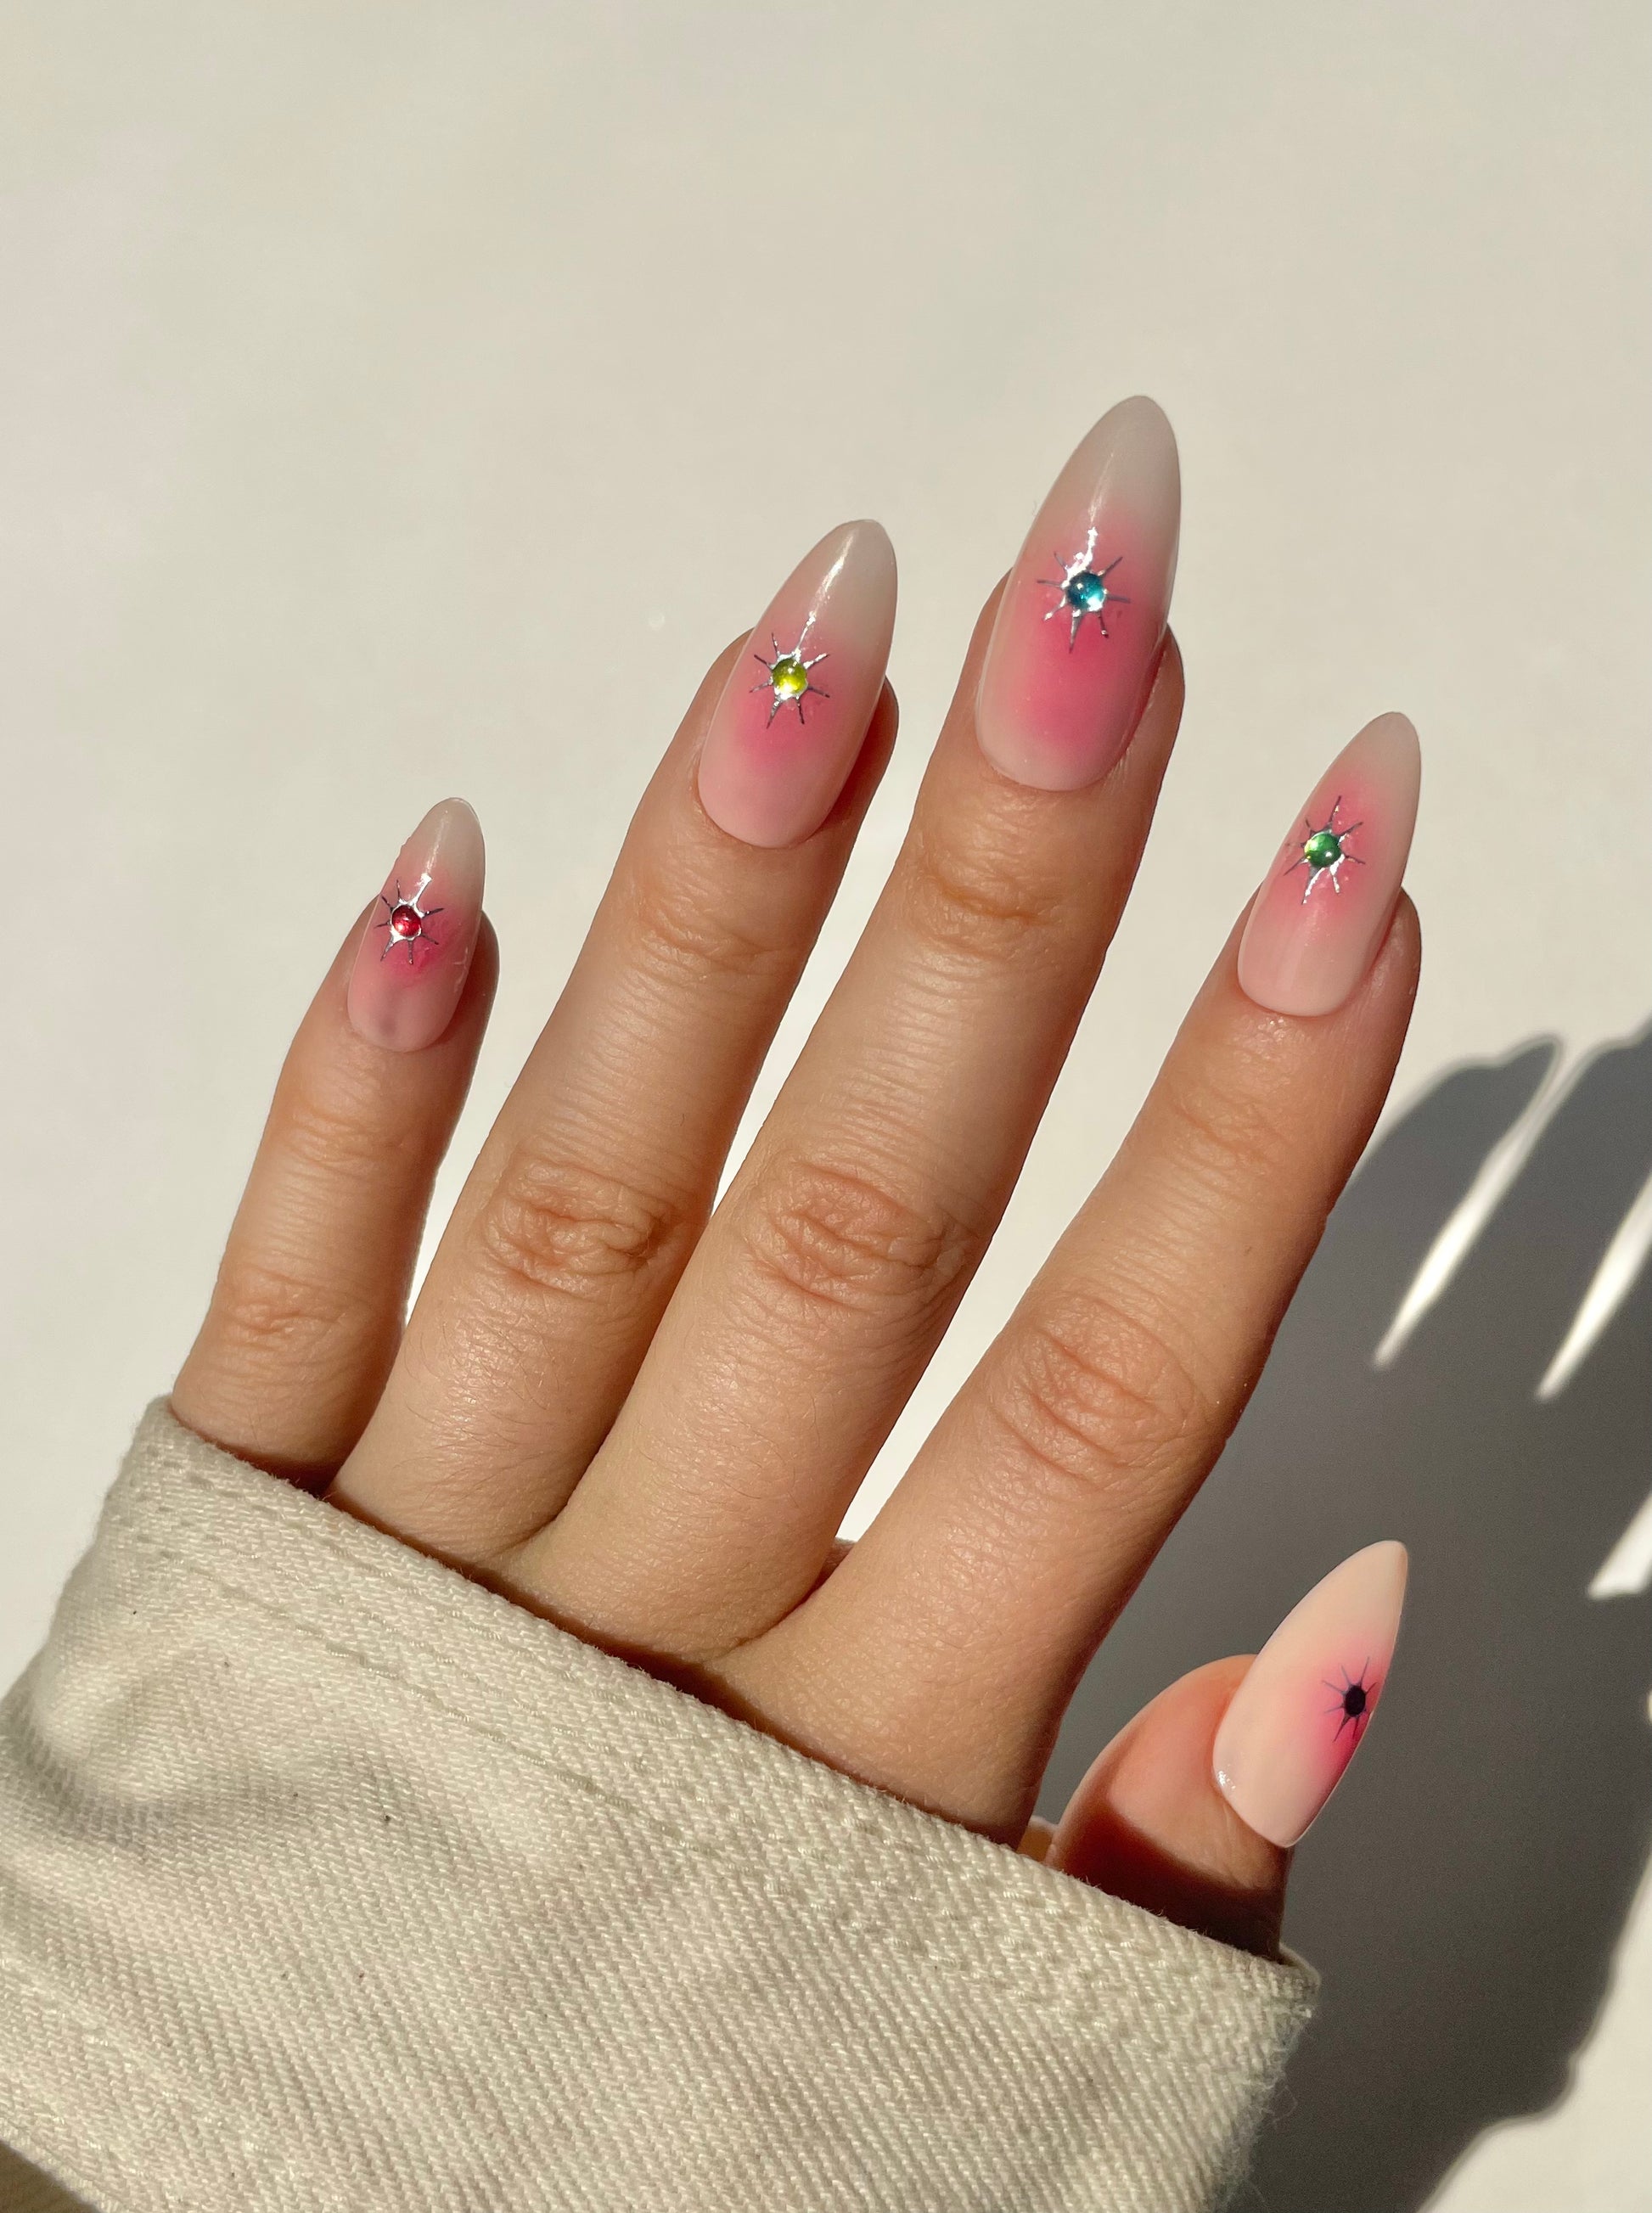 Sparkle Nail art stickers on pink nails